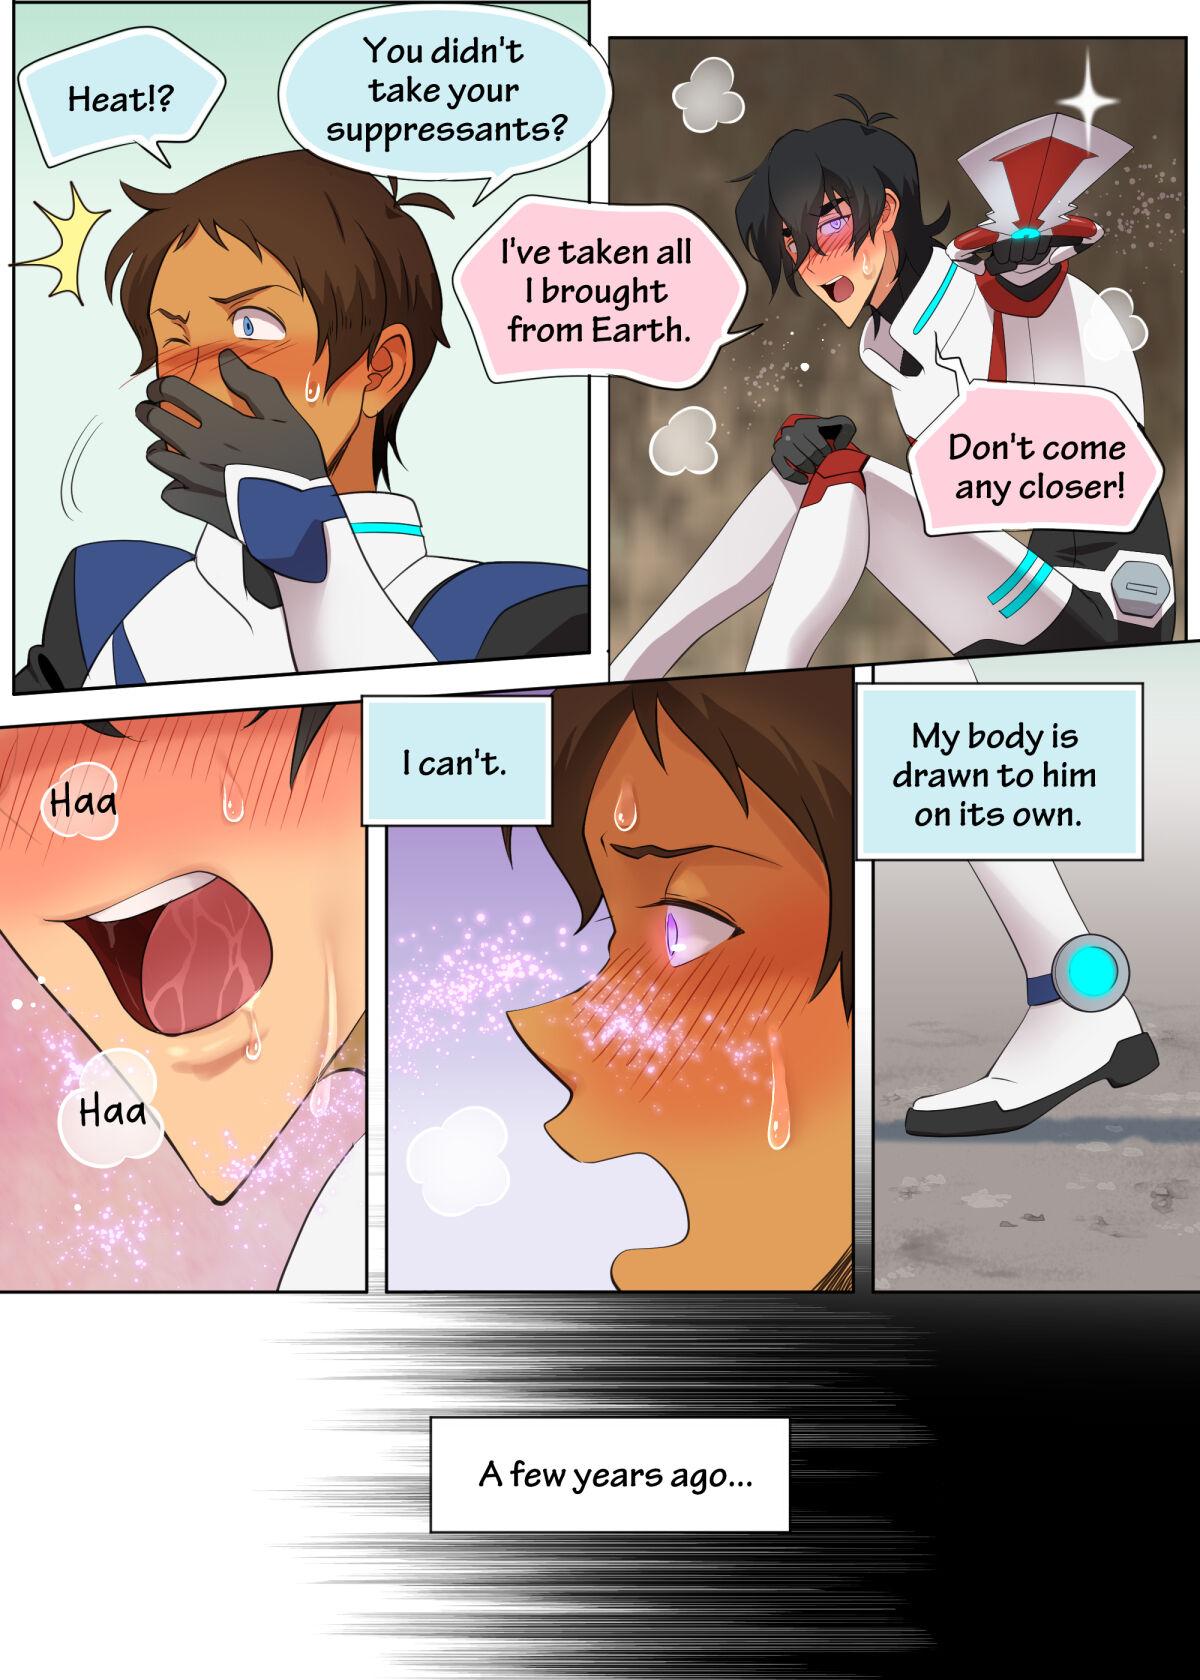 Best Blow Job Ever A MATING MOMENT! - Voltron Adorable - Page 7